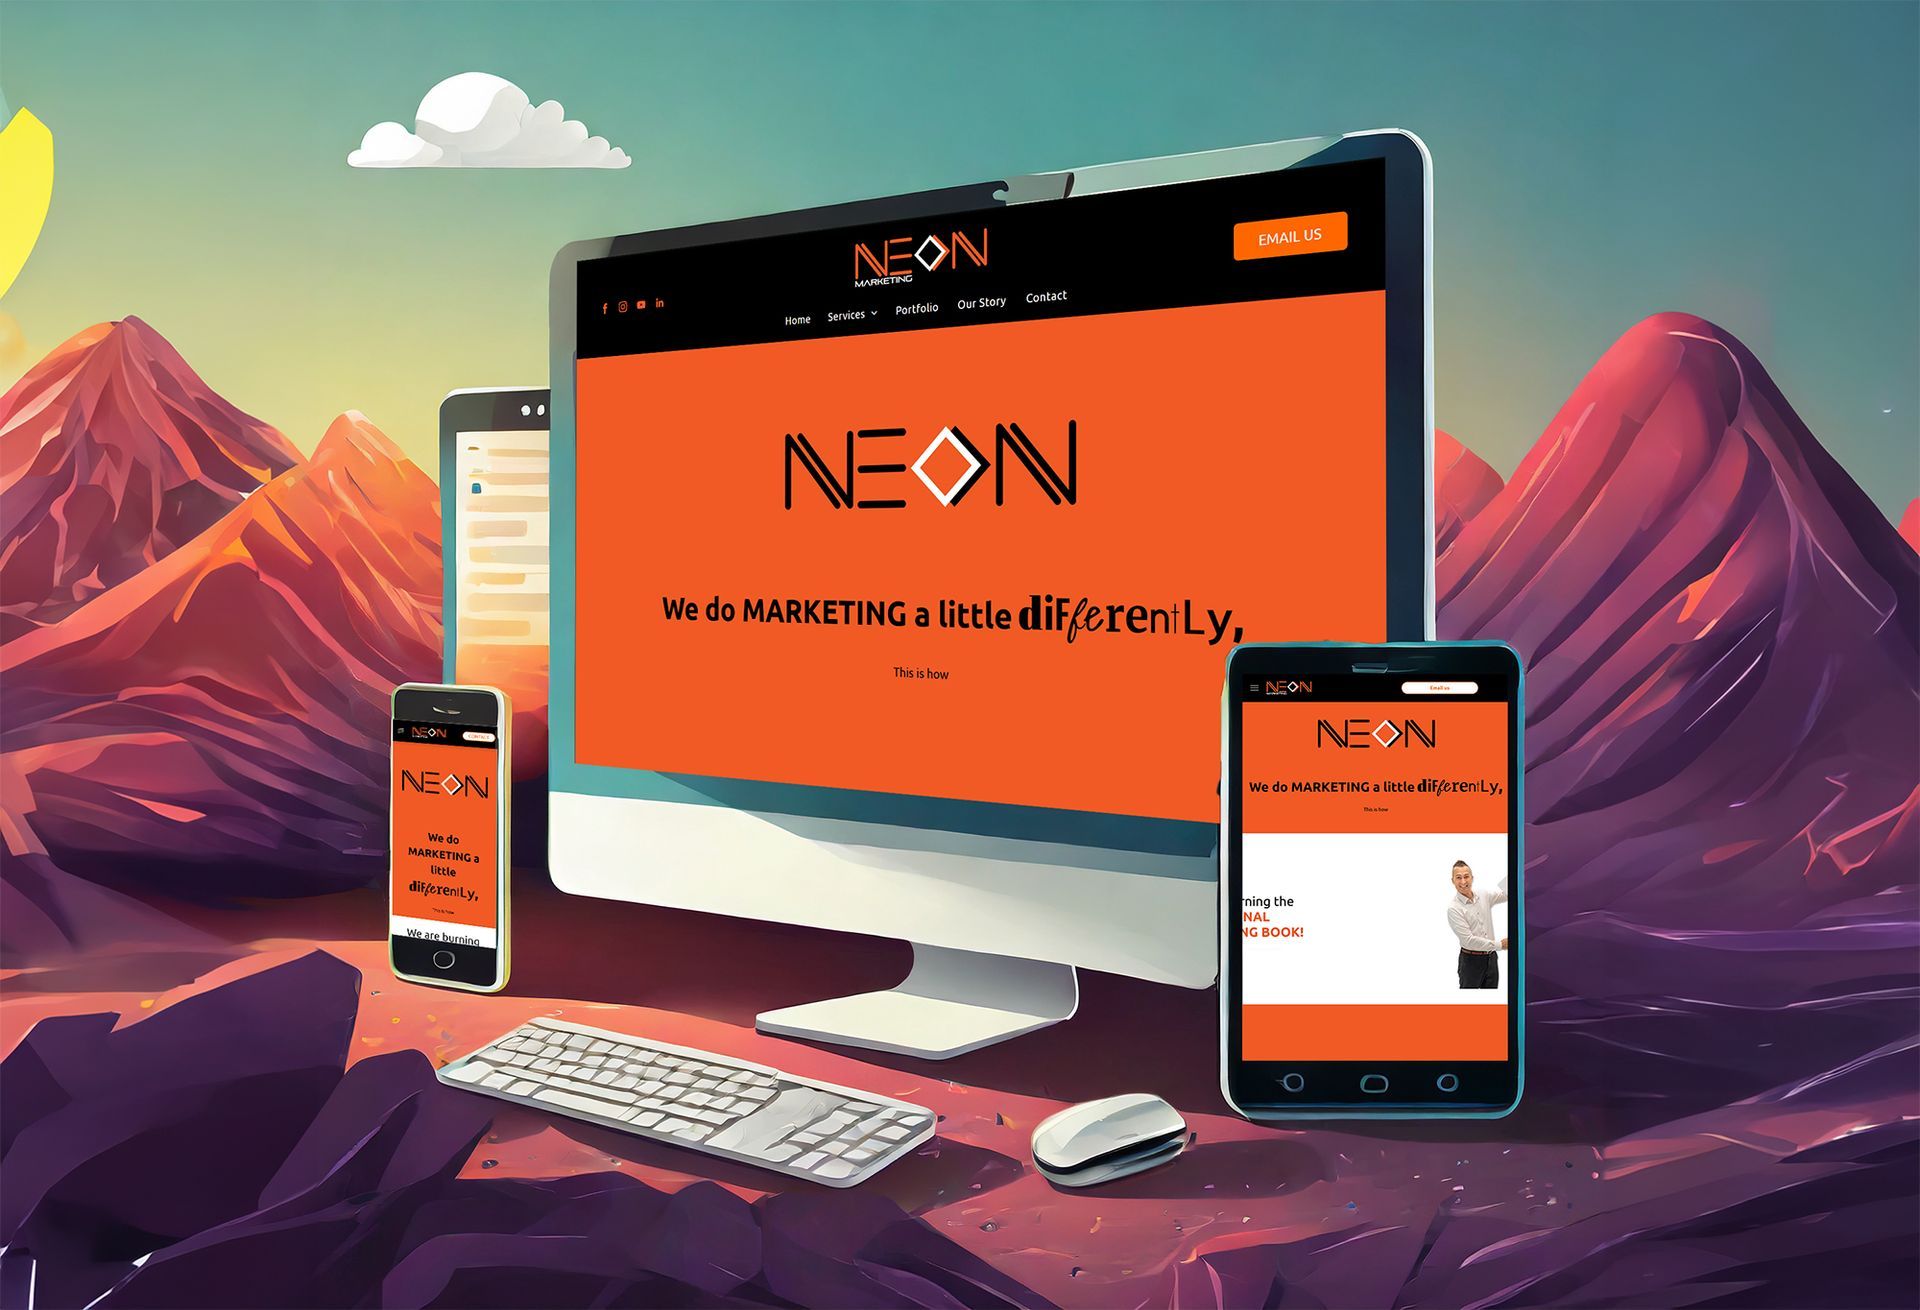 An artistic image of a computer, tablet and phone with the NEON website on screen.